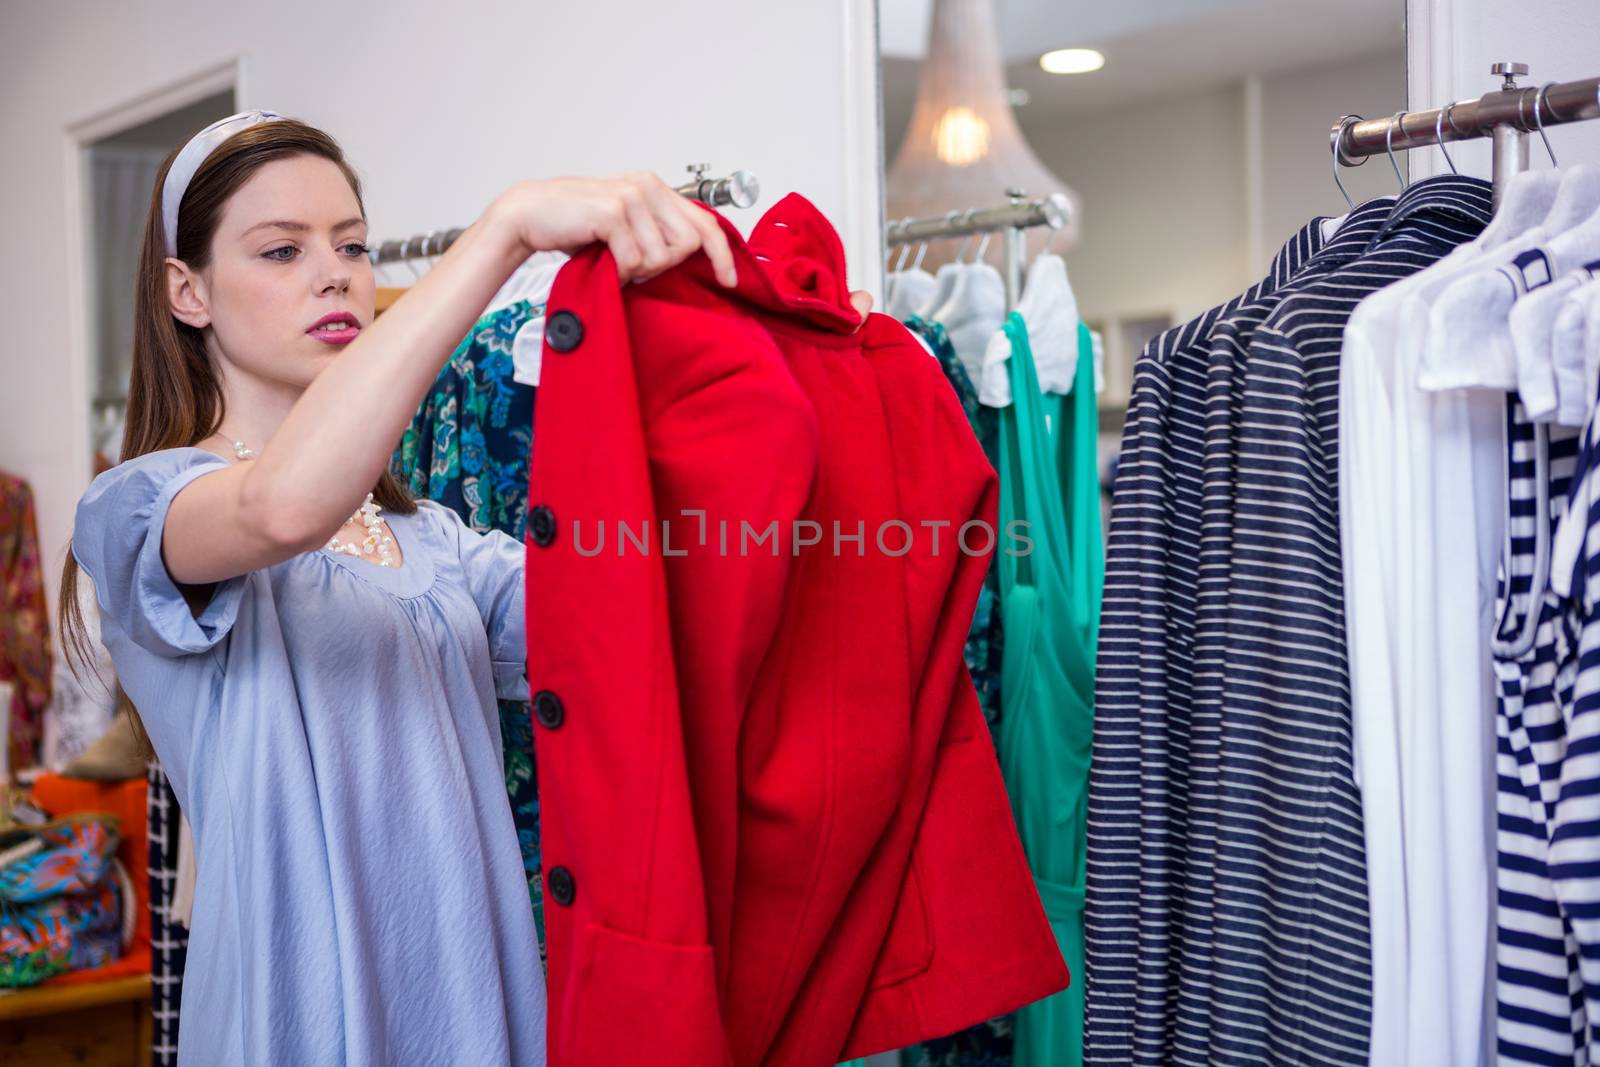 Brunette trying on a red coat in fashion boutique